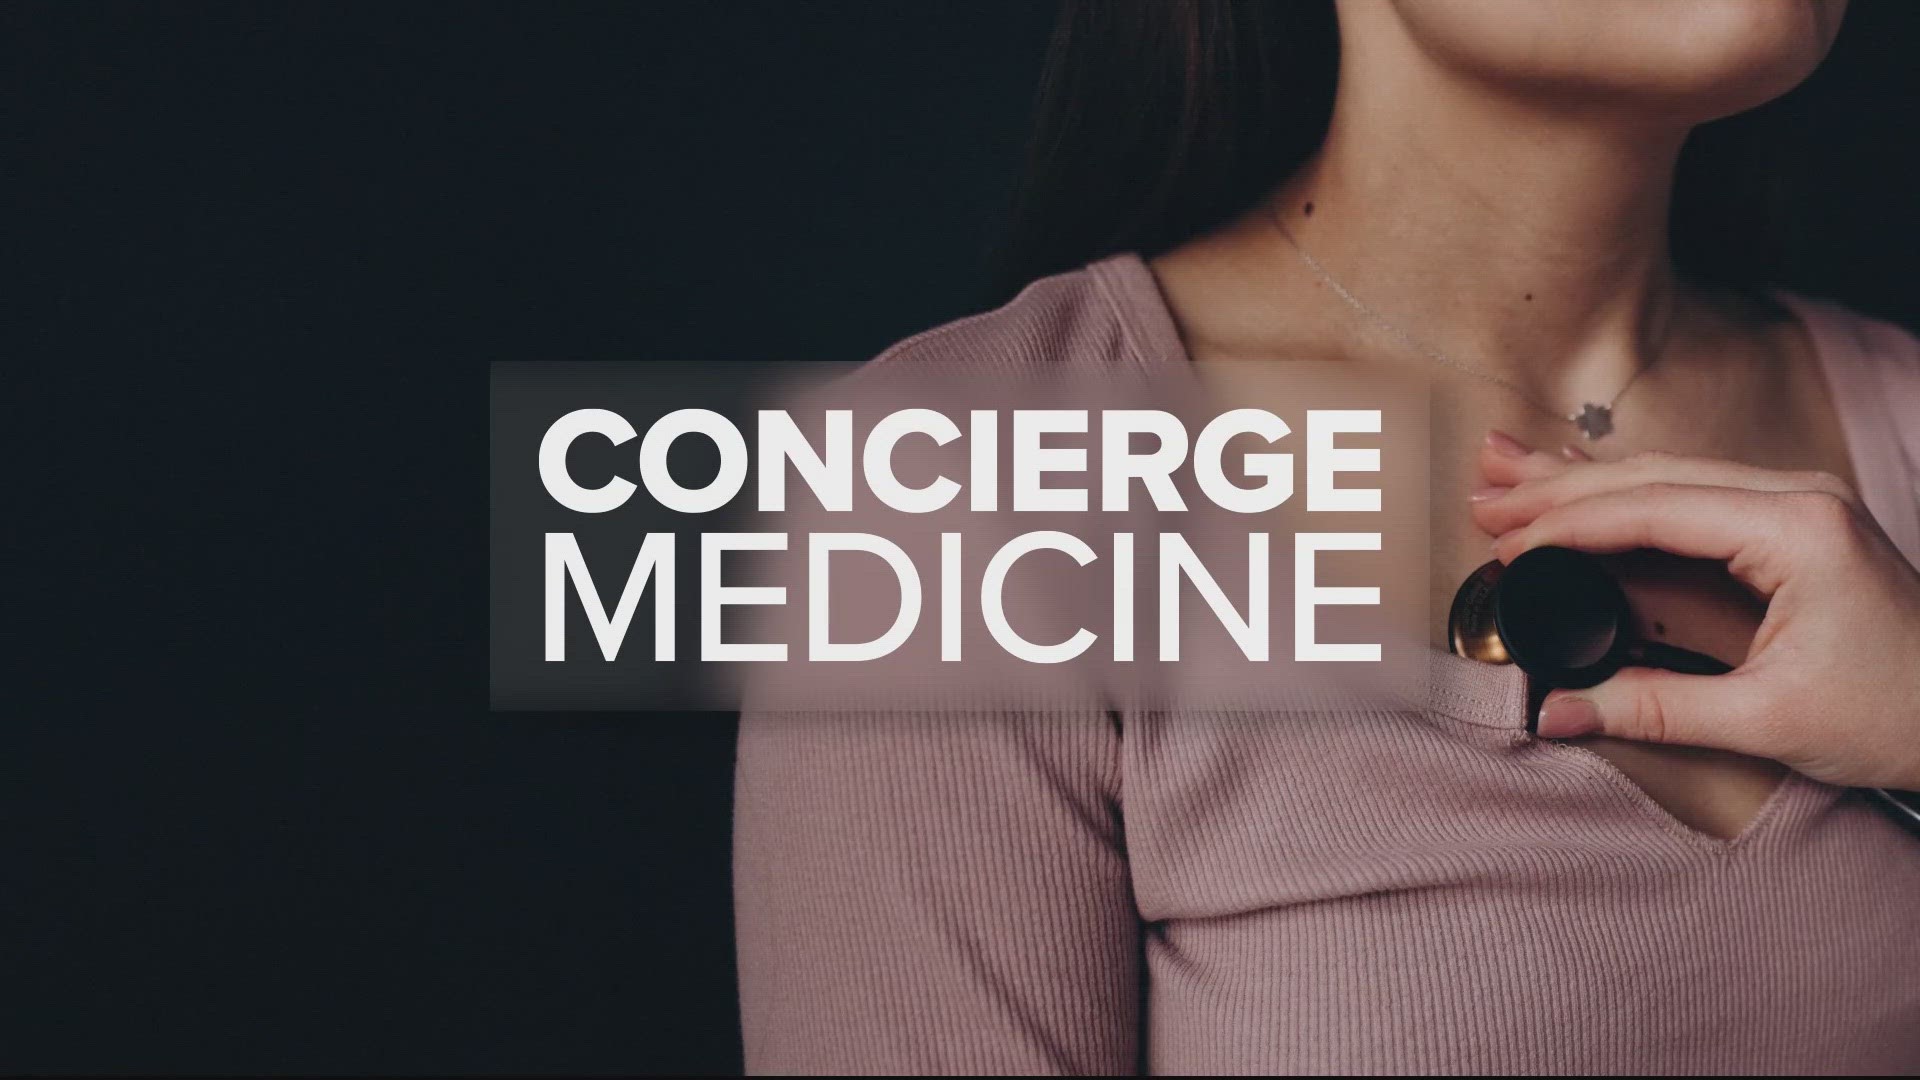 Our health care system's shrinking reimbursements for patients and physicians is fueling a transition to concierge medicine, according to some doctors.